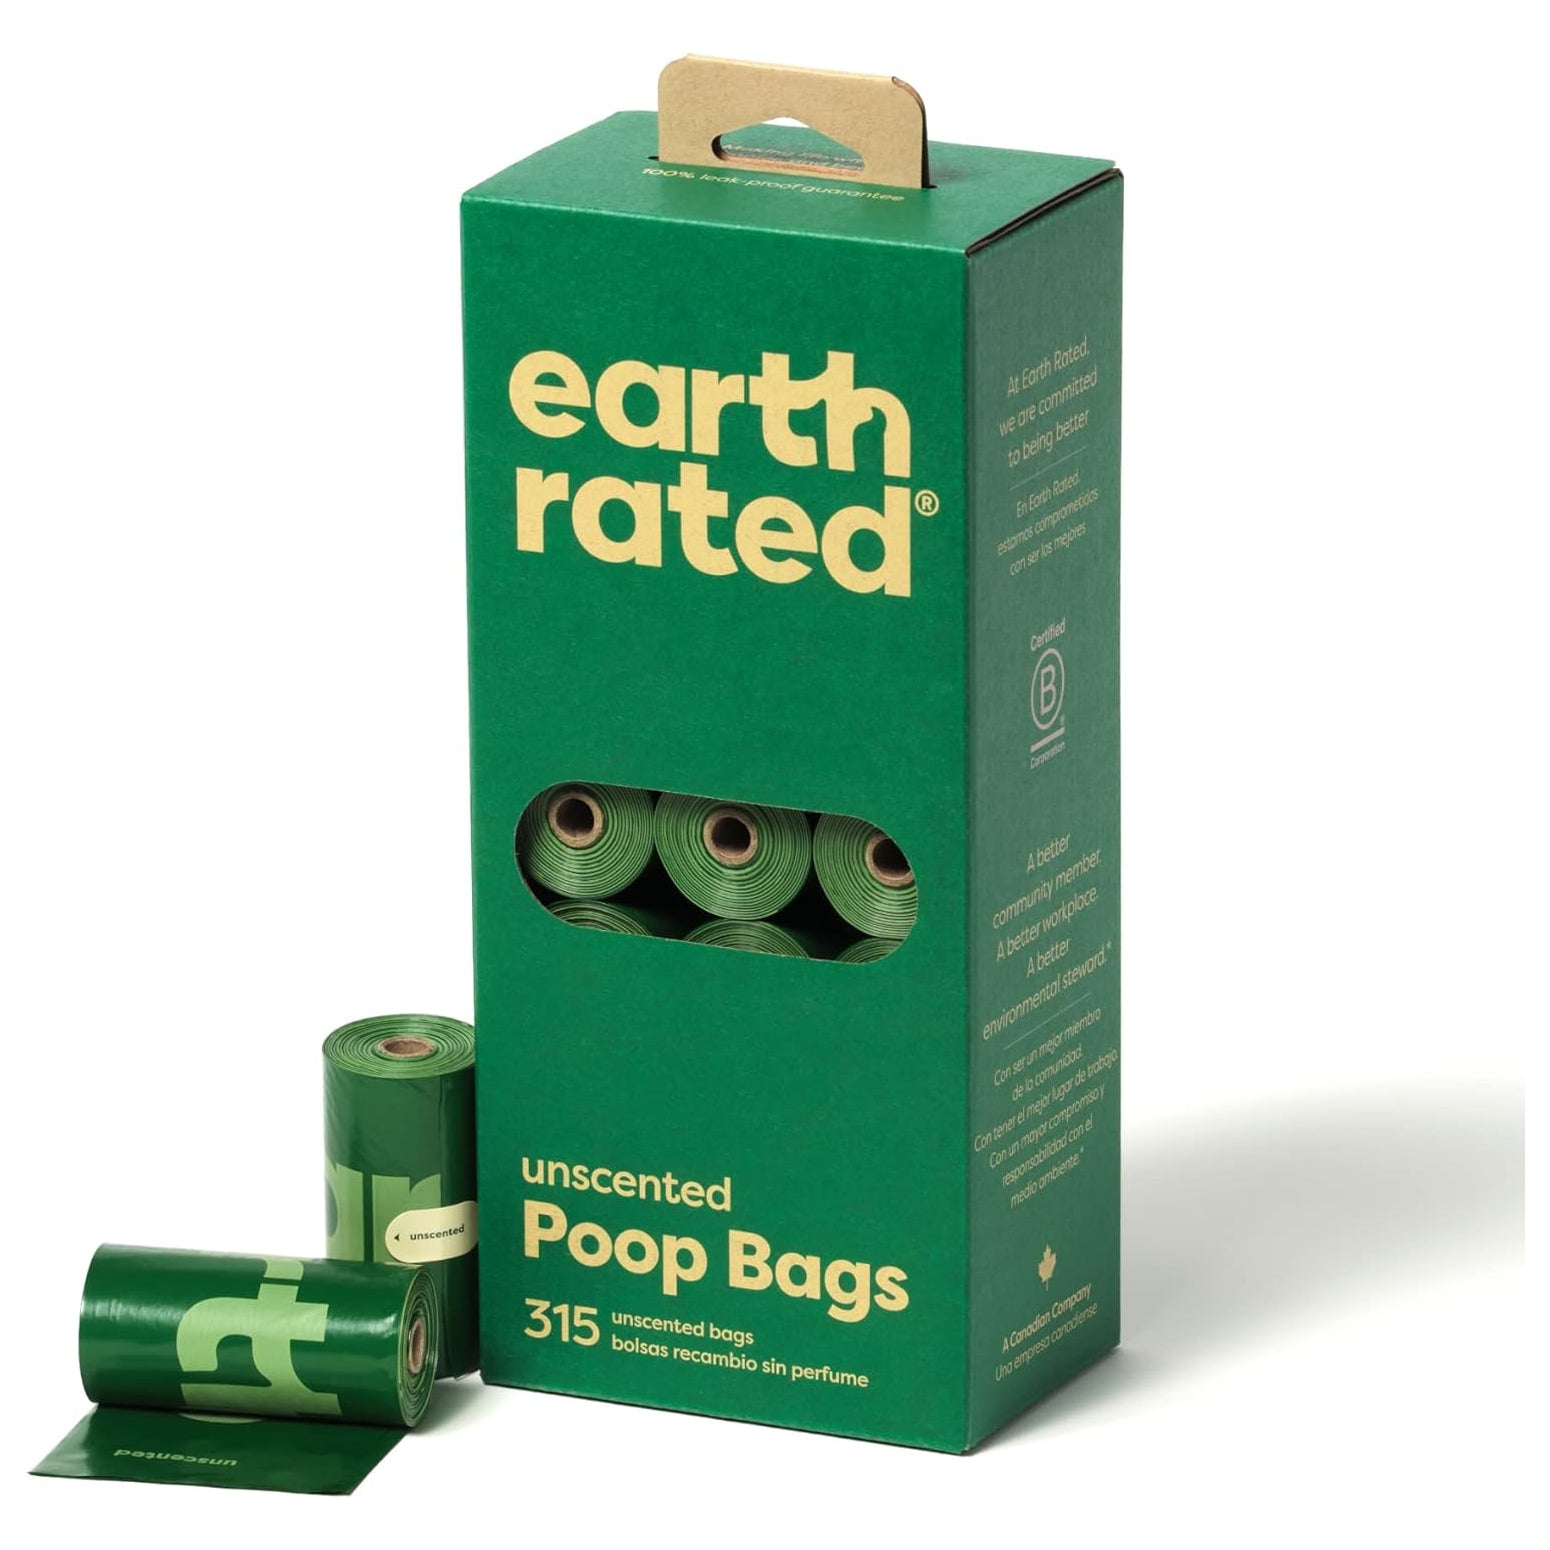 Earth Rated 315 Poo Bags on 21 Refill Rolls Unscented